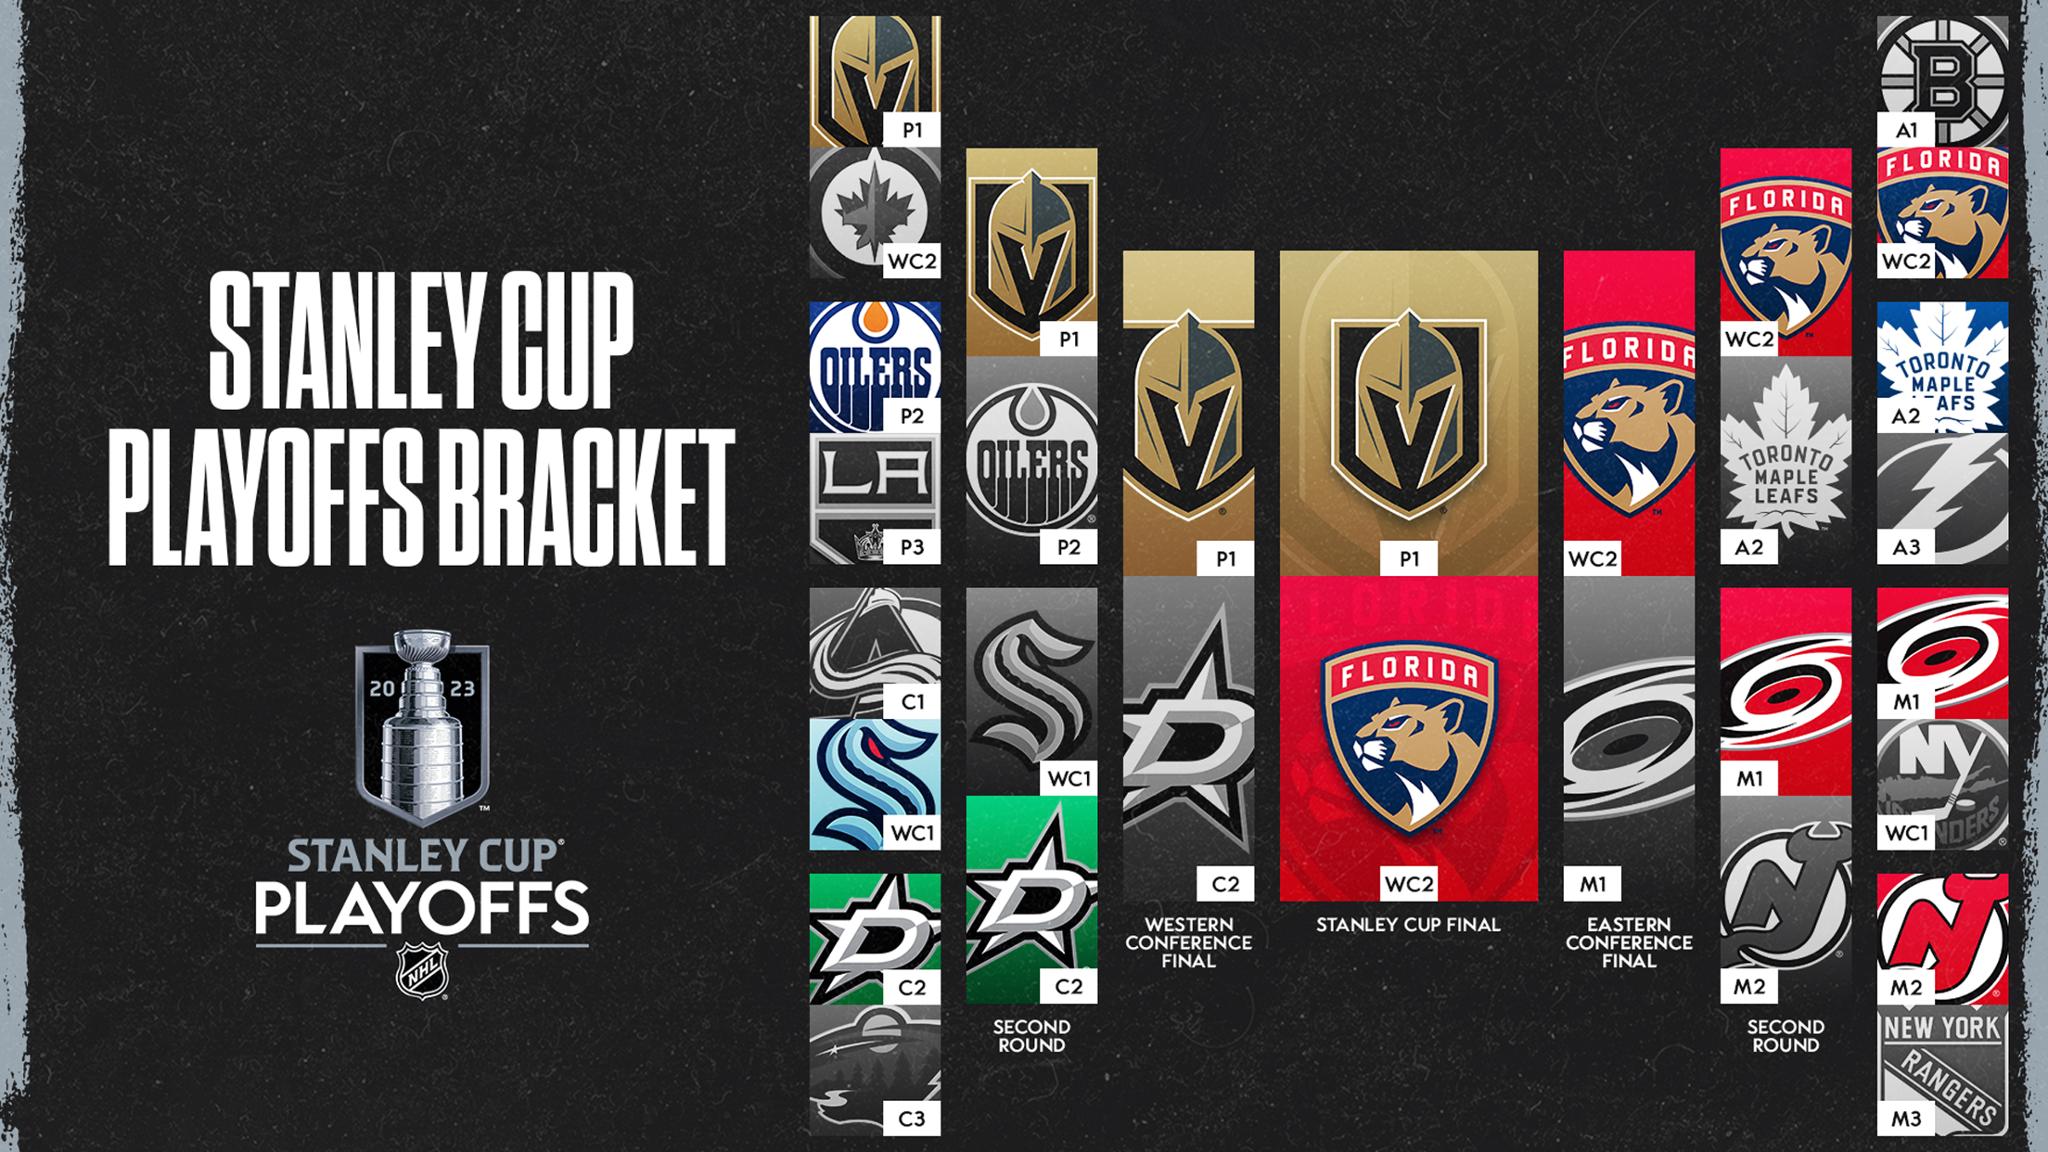 Here is your 2018 Stanley Cup Final schedule